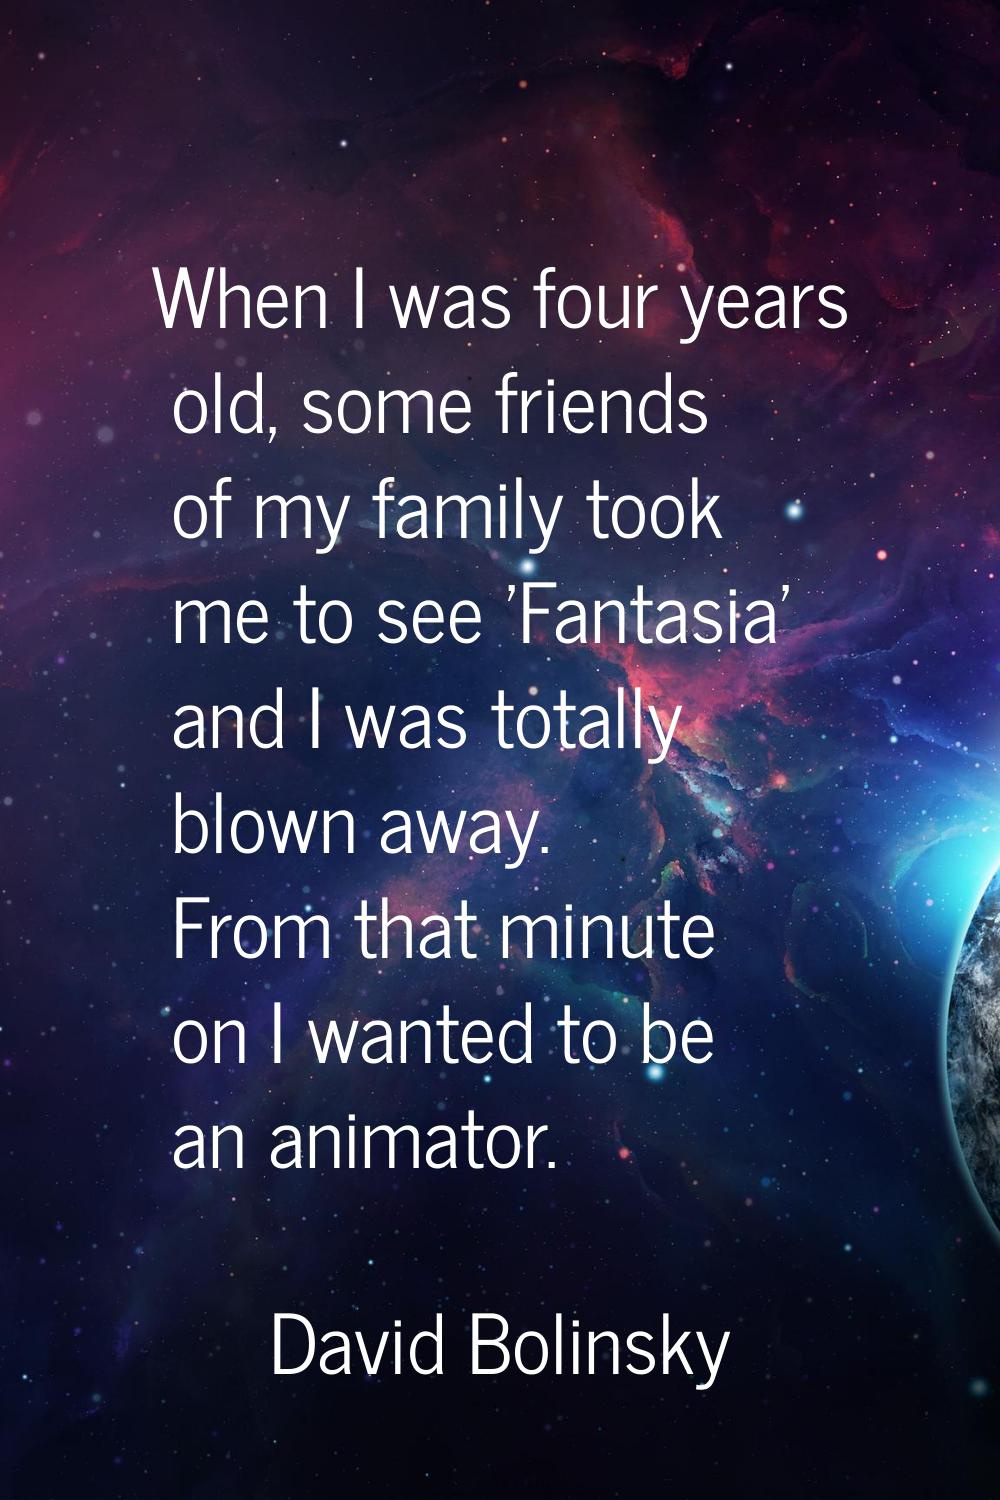 When I was four years old, some friends of my family took me to see 'Fantasia' and I was totally bl